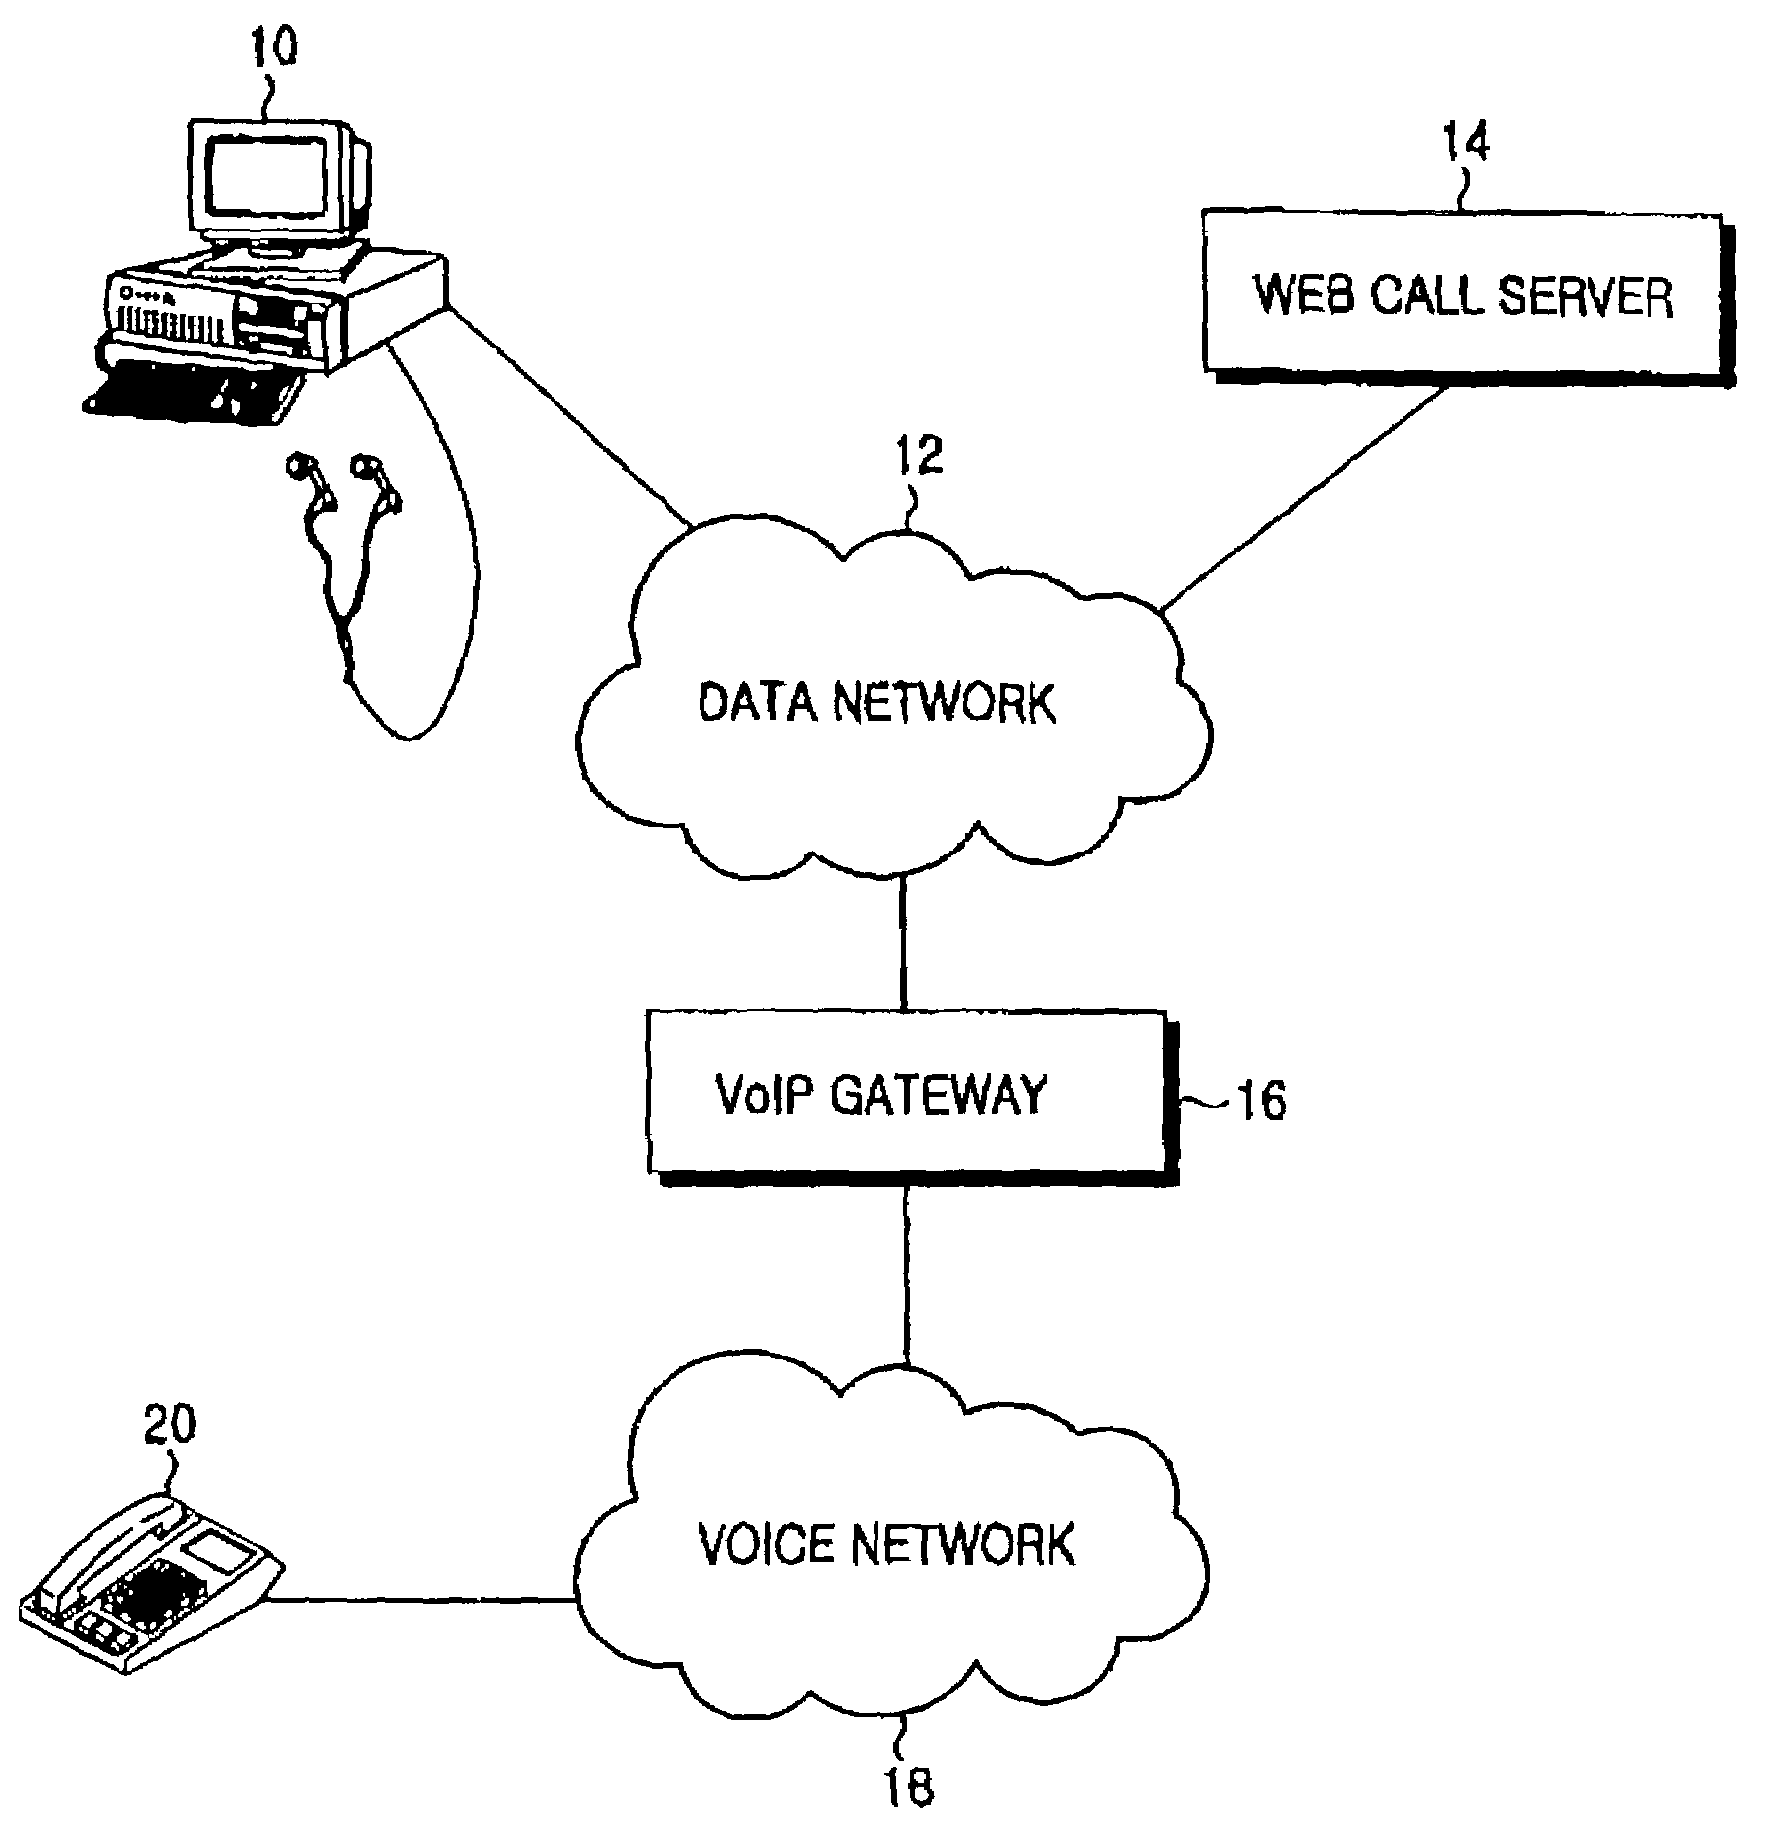 Method for sending dual-tone multi-frequency signal using voice over internet protocol